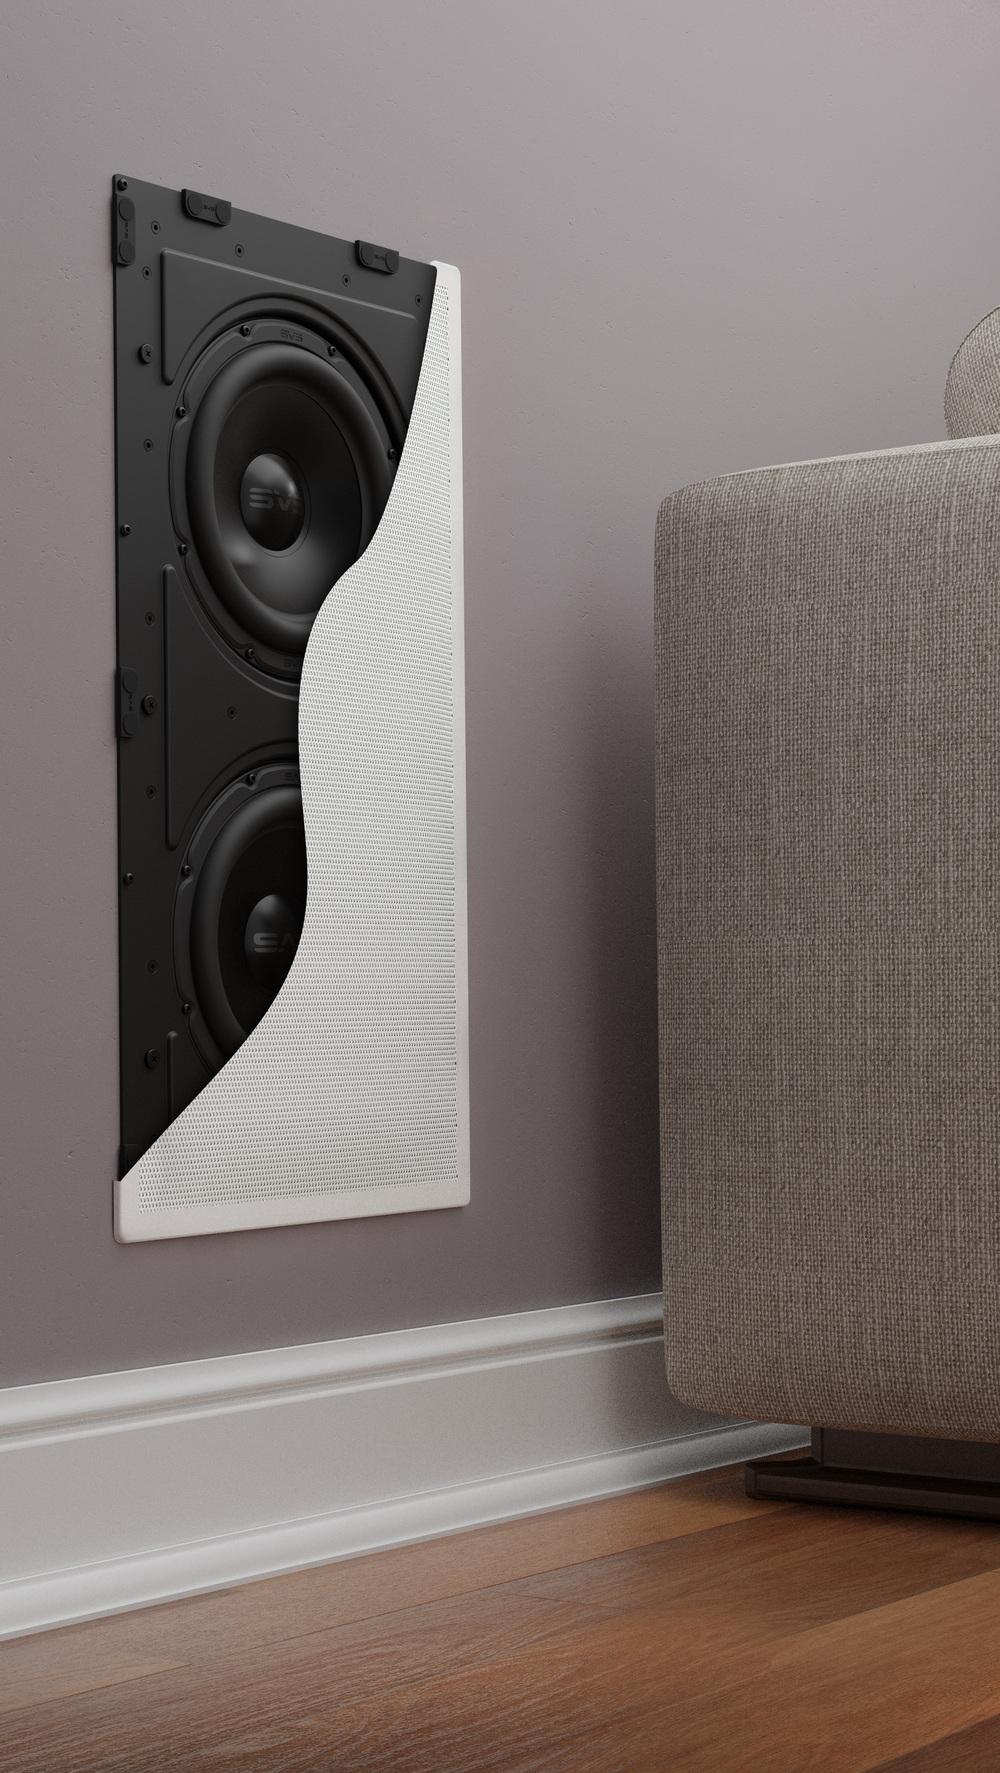 SVS in wall subwoofer